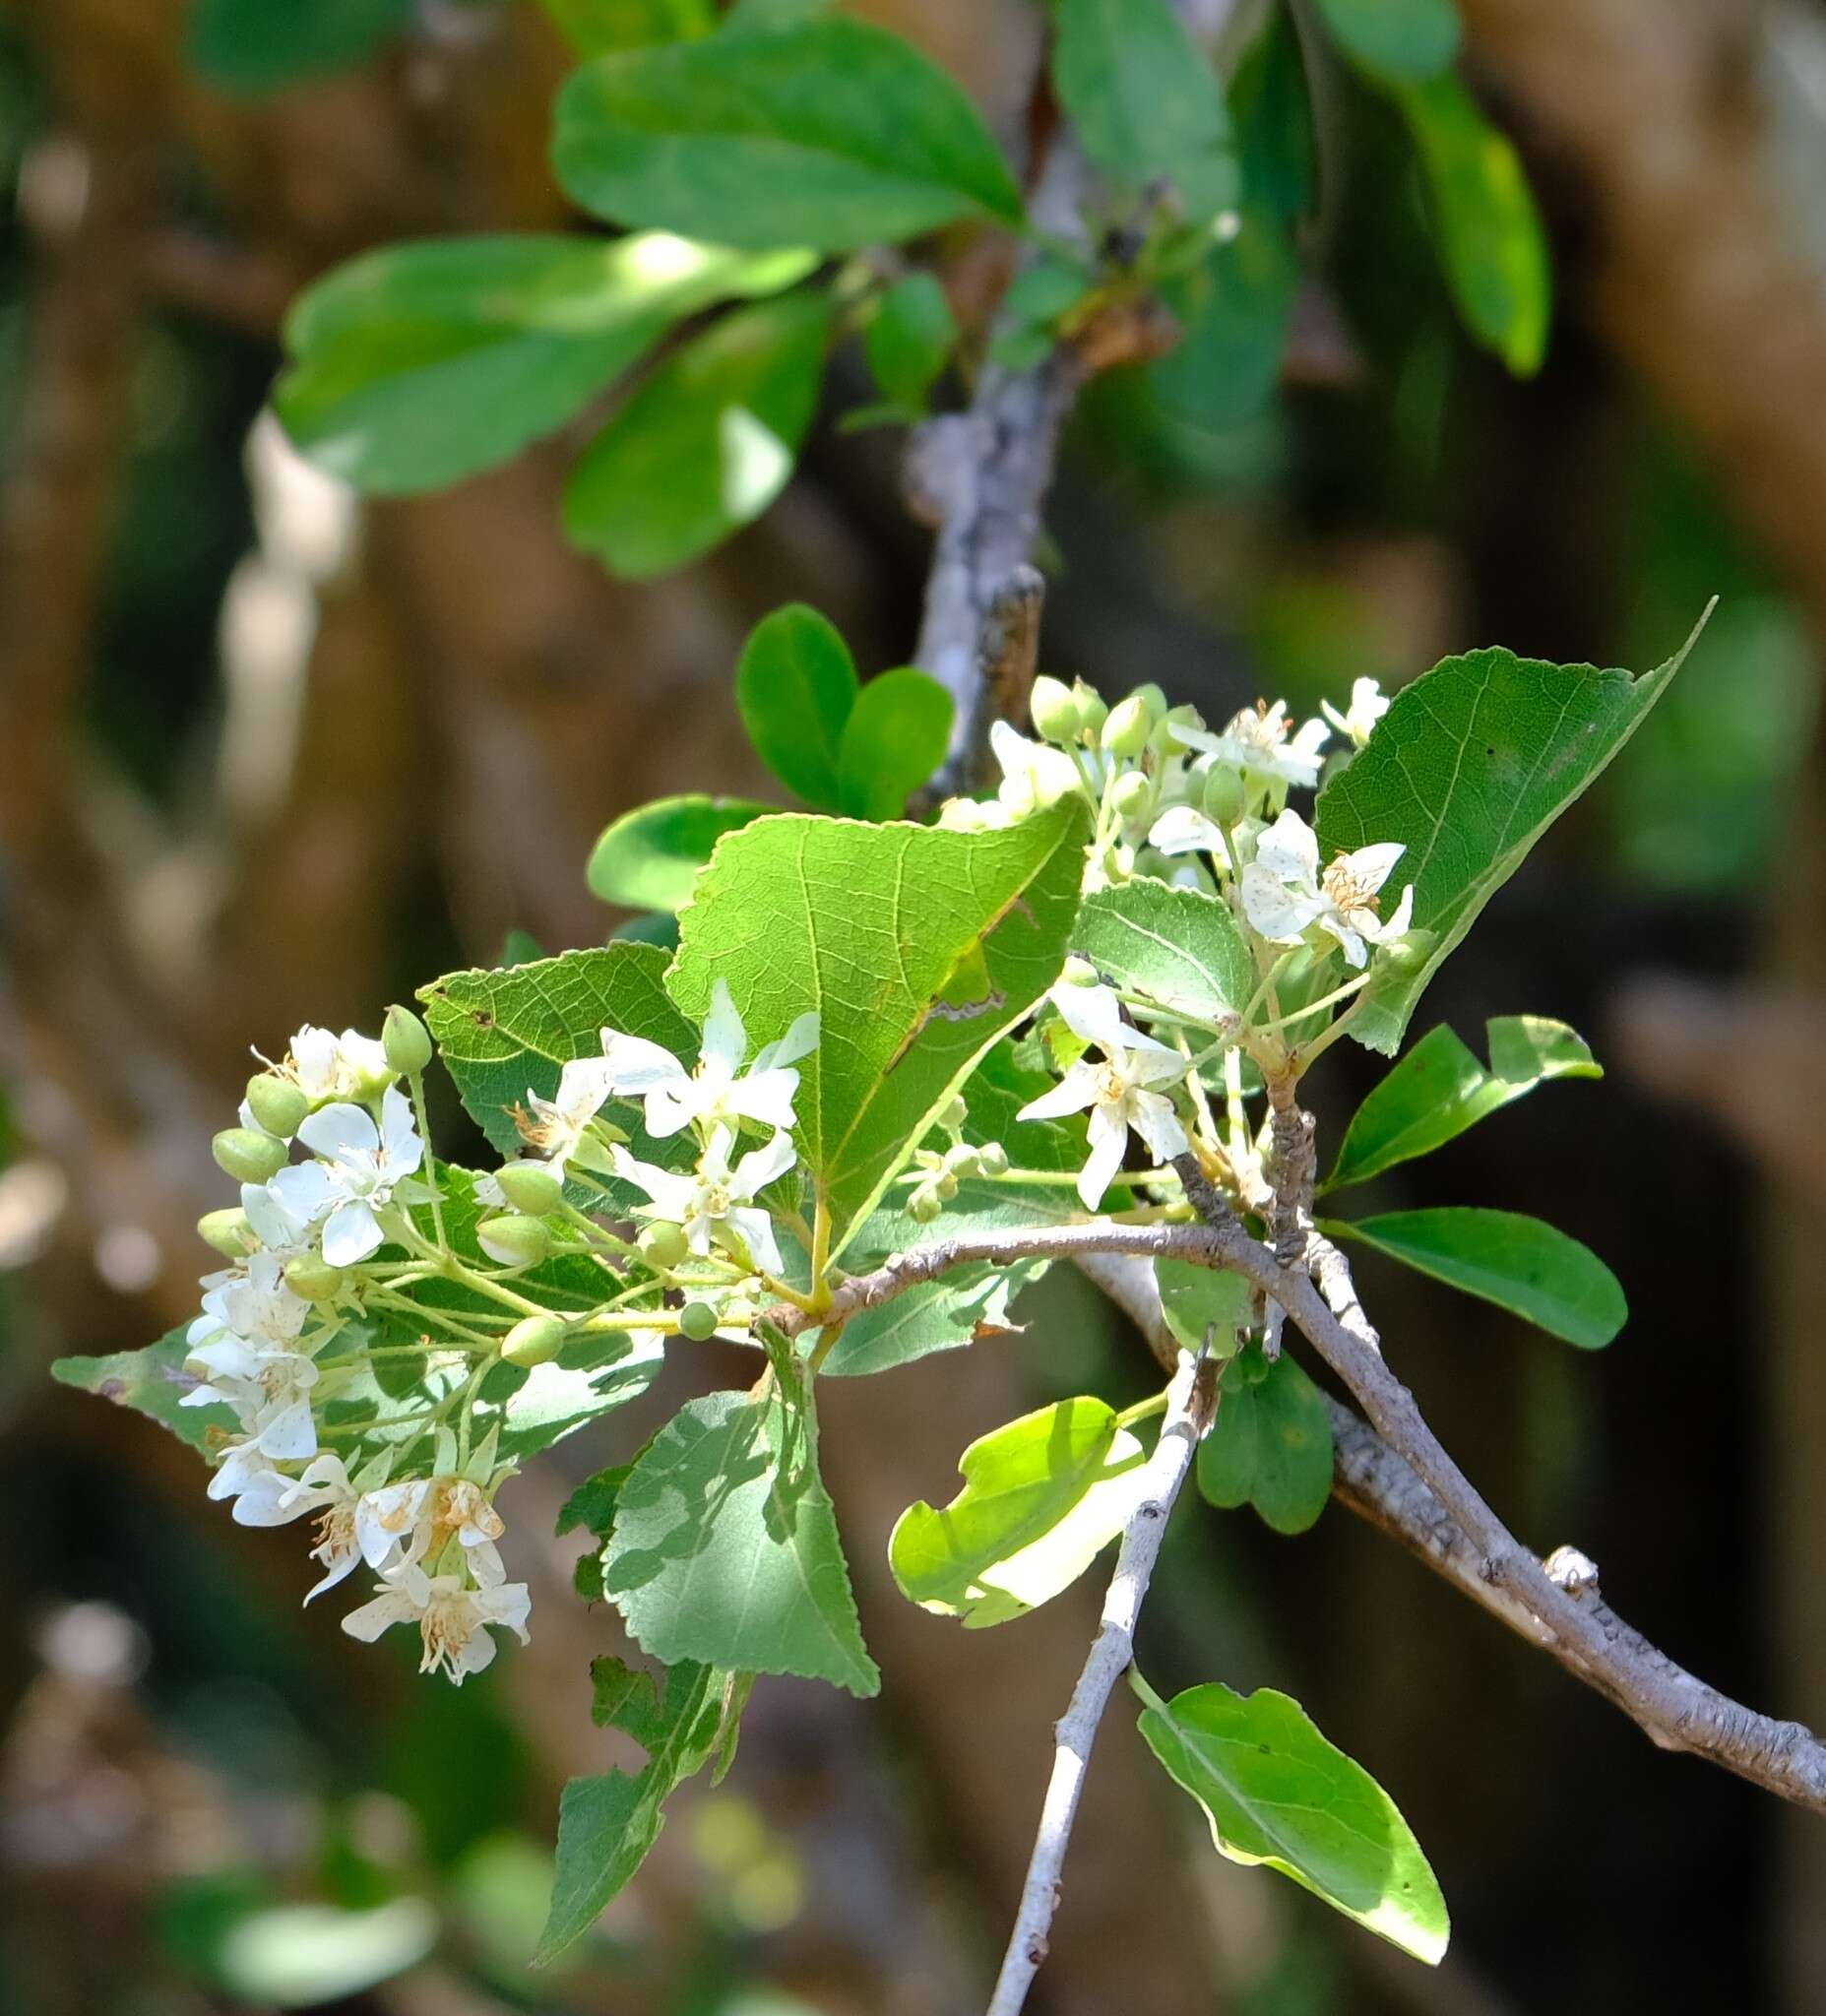 Image of Natal wild pear